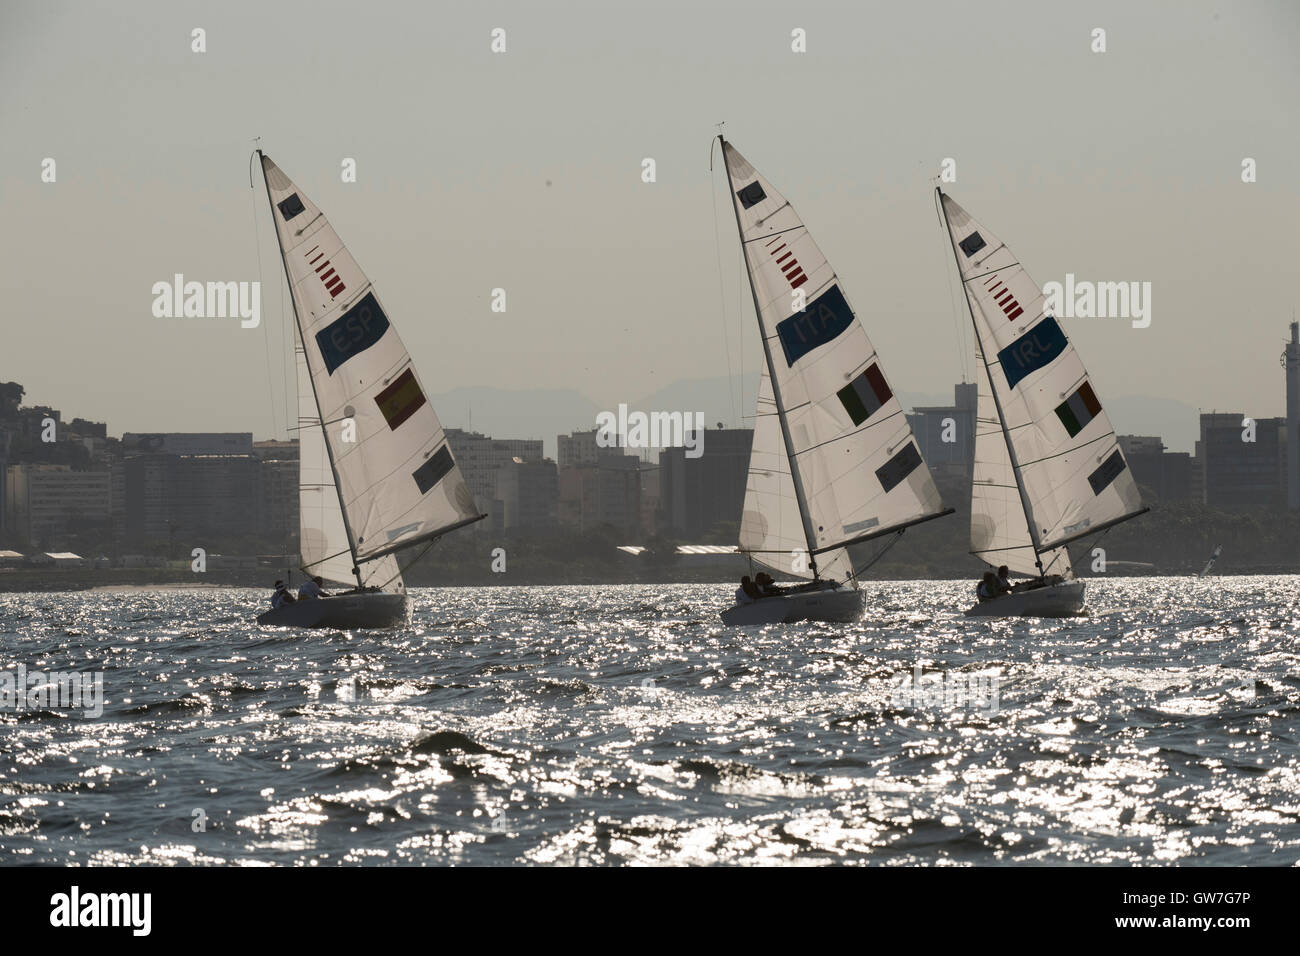 The 3-person keelboat Sonar class boats race on Guanabara Bay during sailing competition at  the 2016 Paralympics. Stock Photo